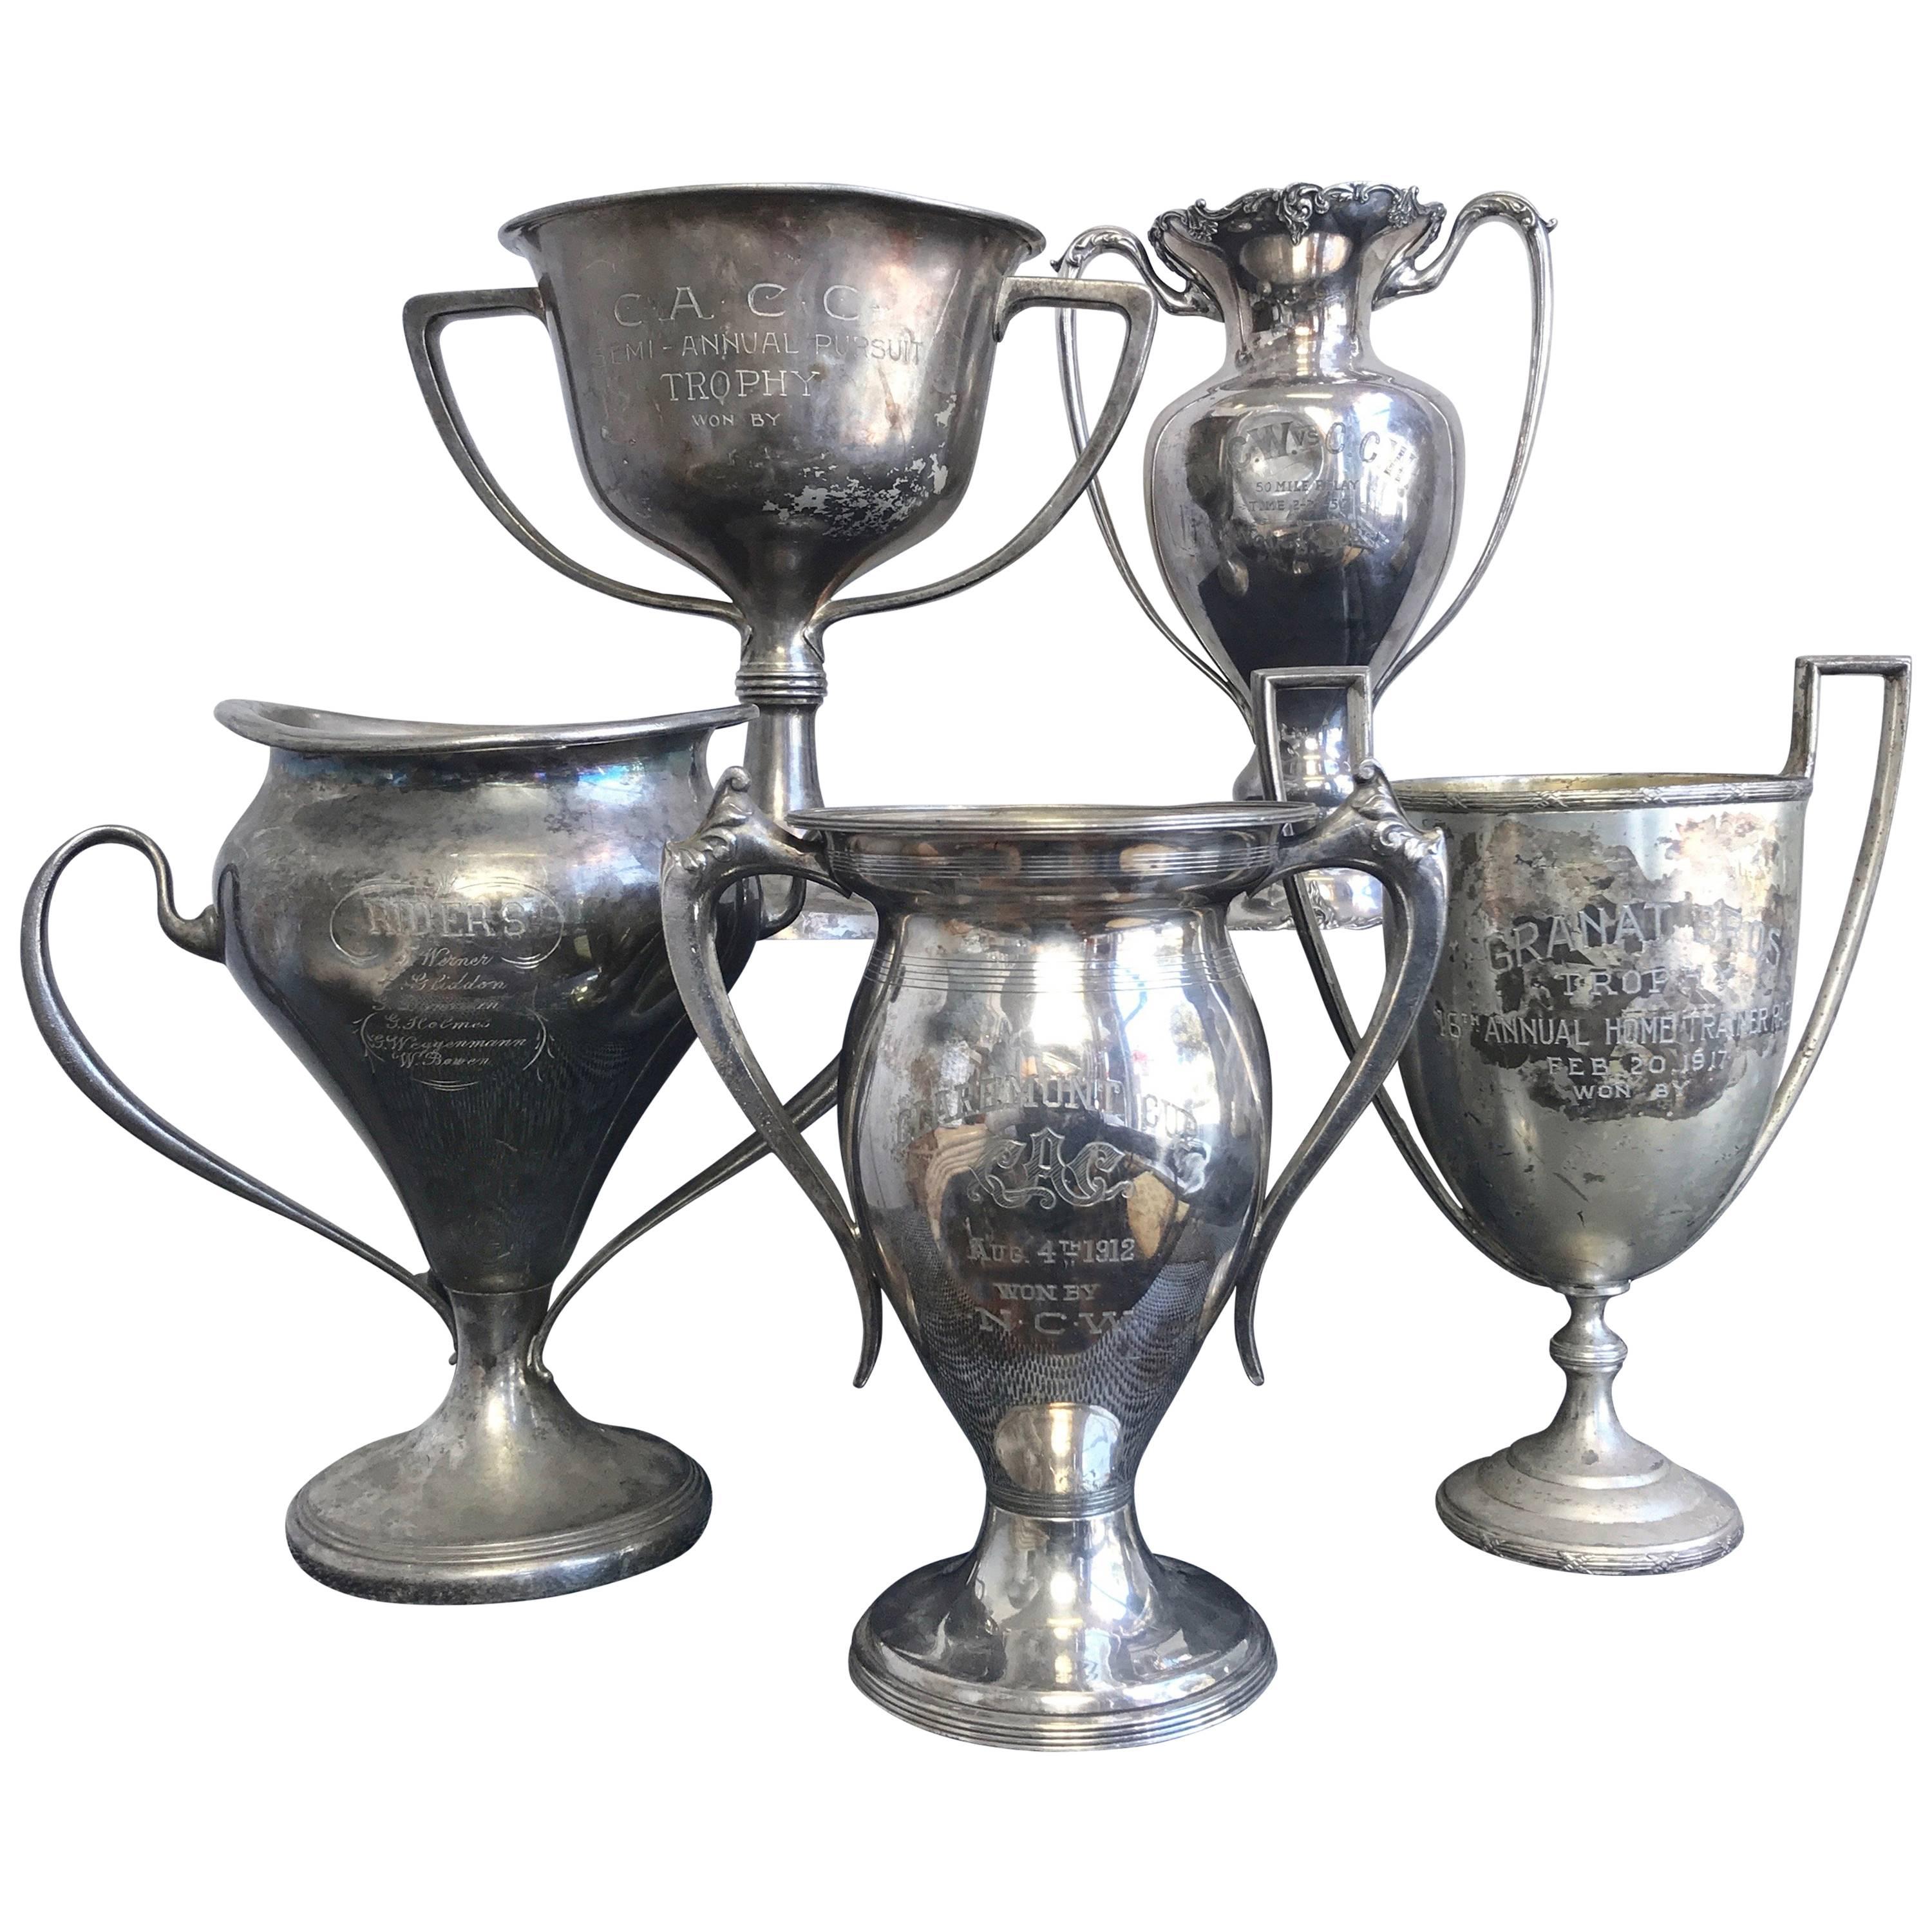 Group of Five Early 1900s California Bay Area Silverplate Cycling Trophies